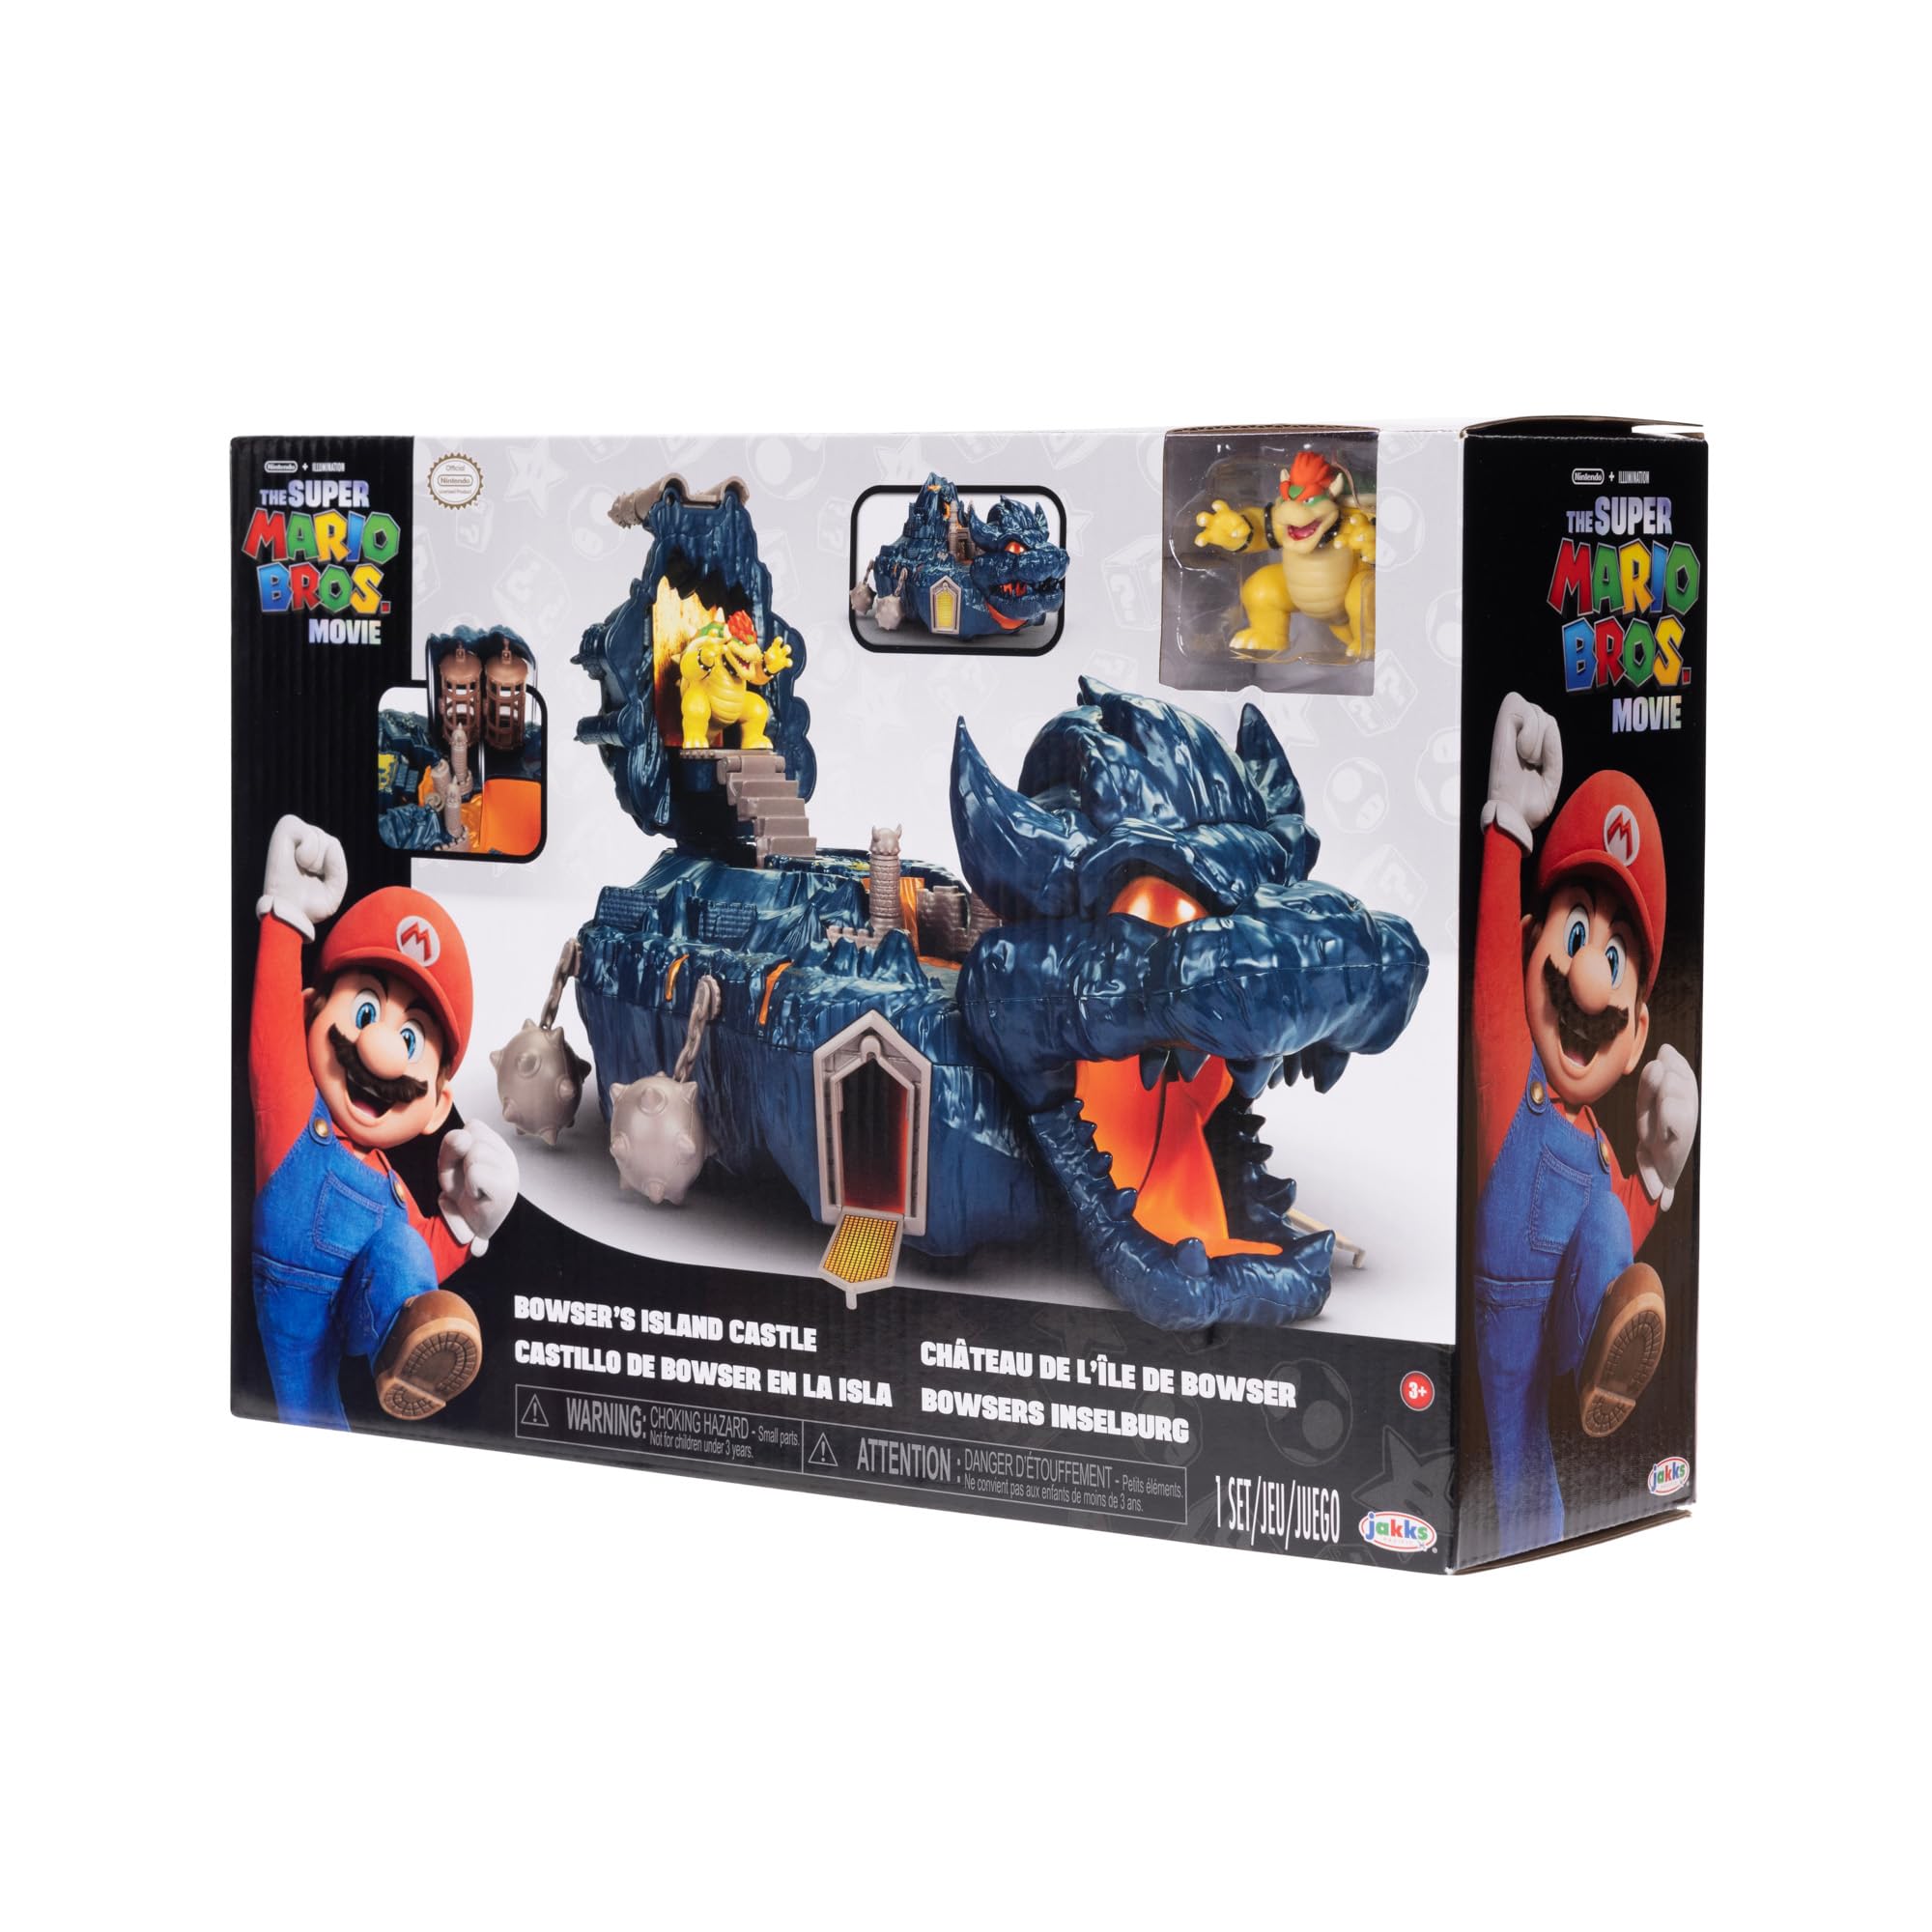 The Super Mario Bowser Island Castle Playset with 2.5” Bowser Action Figure & Interactive Pieces